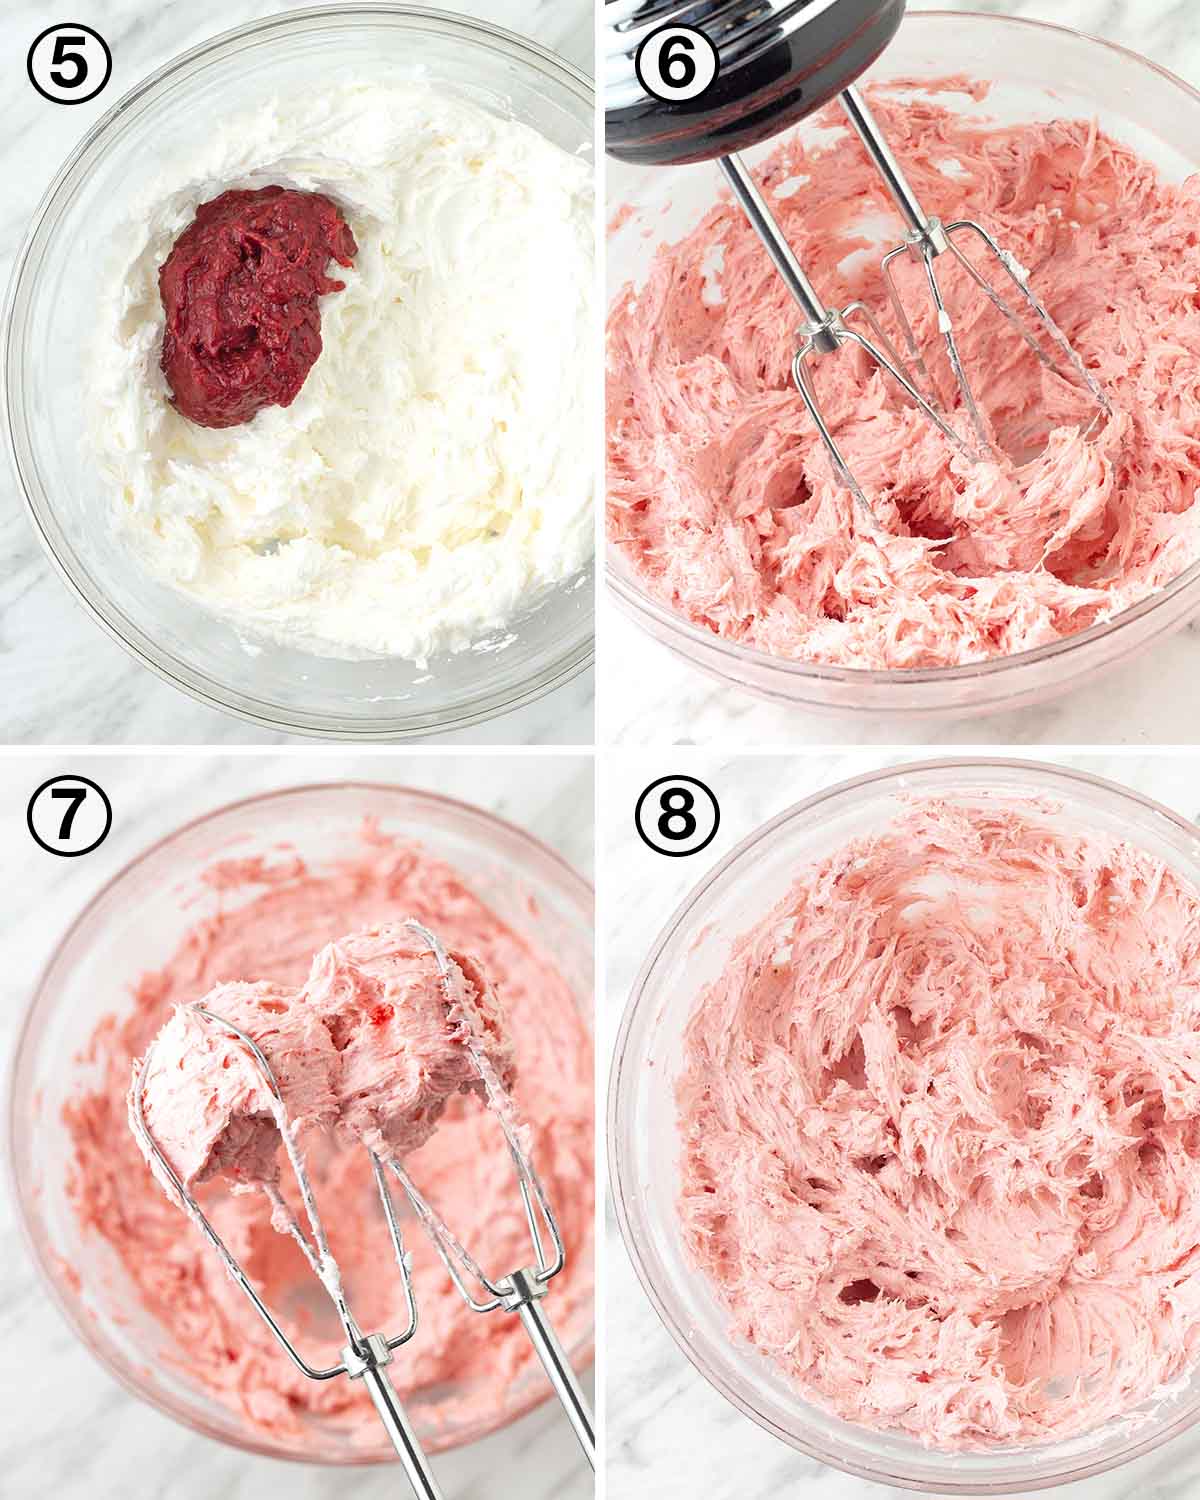 A collage of four images showing the second sequence of steps needed to make vegan strawberry frosting with fresh berries.